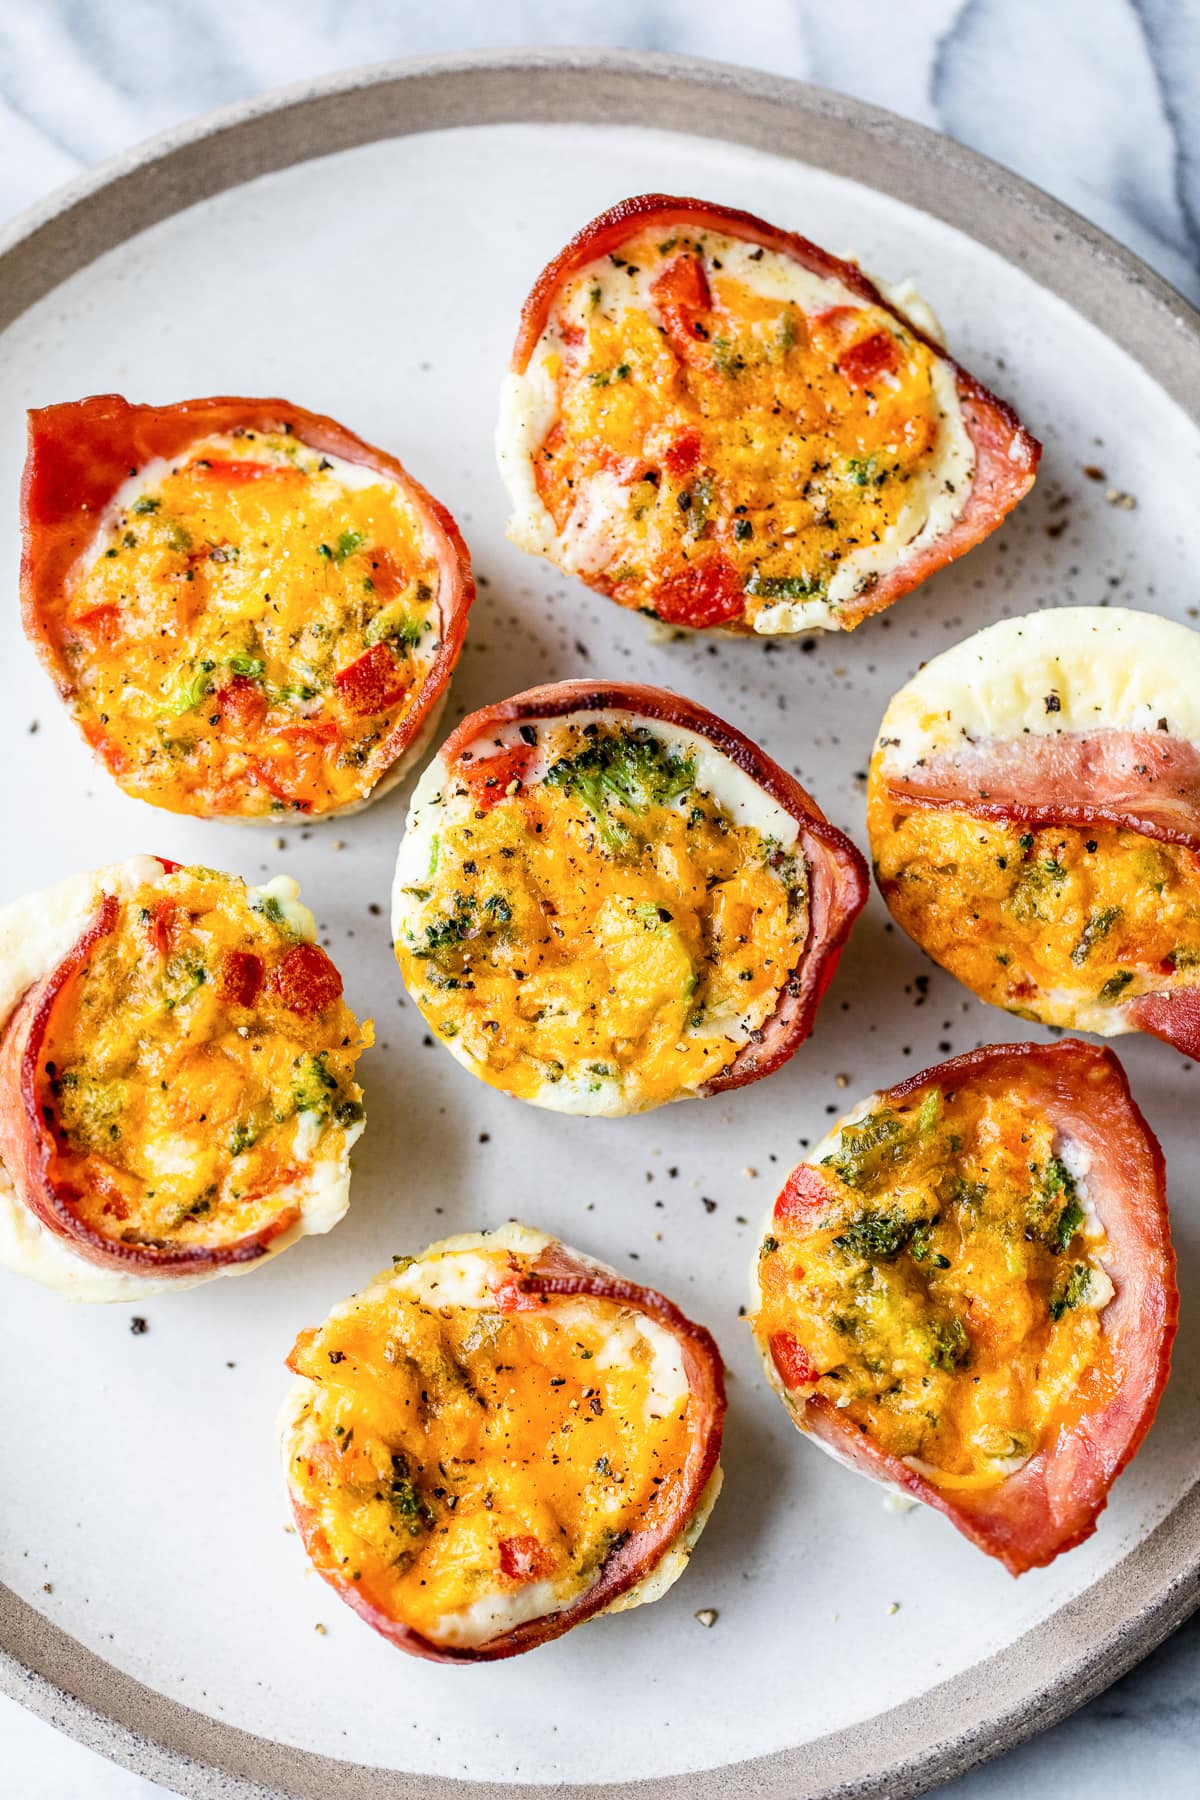 Egg Muffins with Turkey Bacon, Cottage Cheese and Veggies